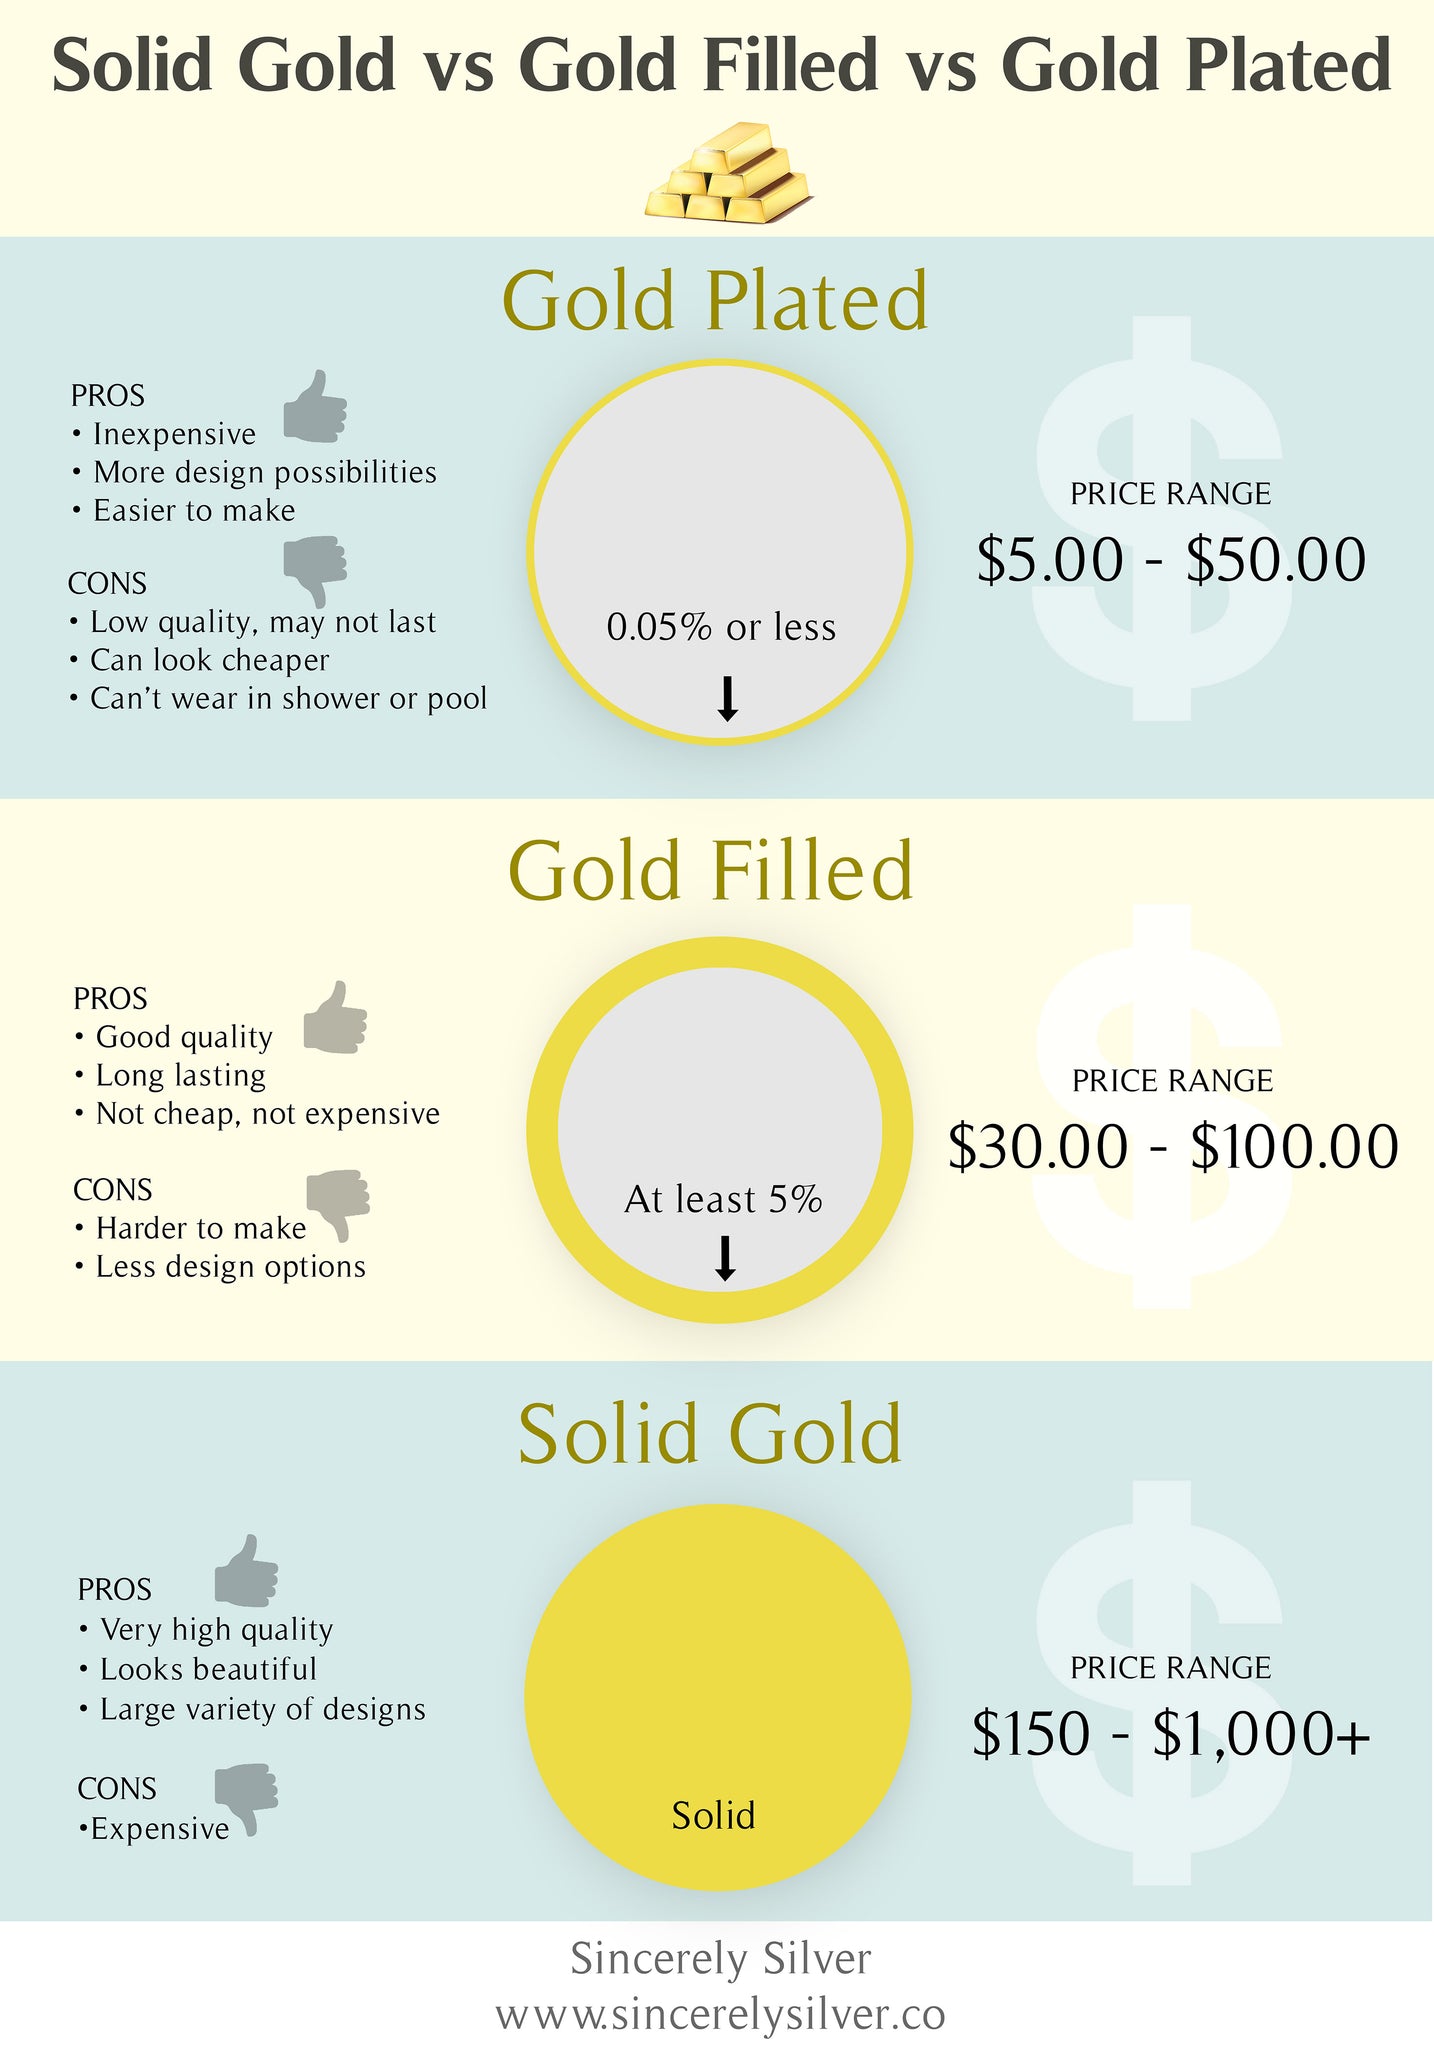 Gold Filled vs Gold Plated | Sincerely Silver